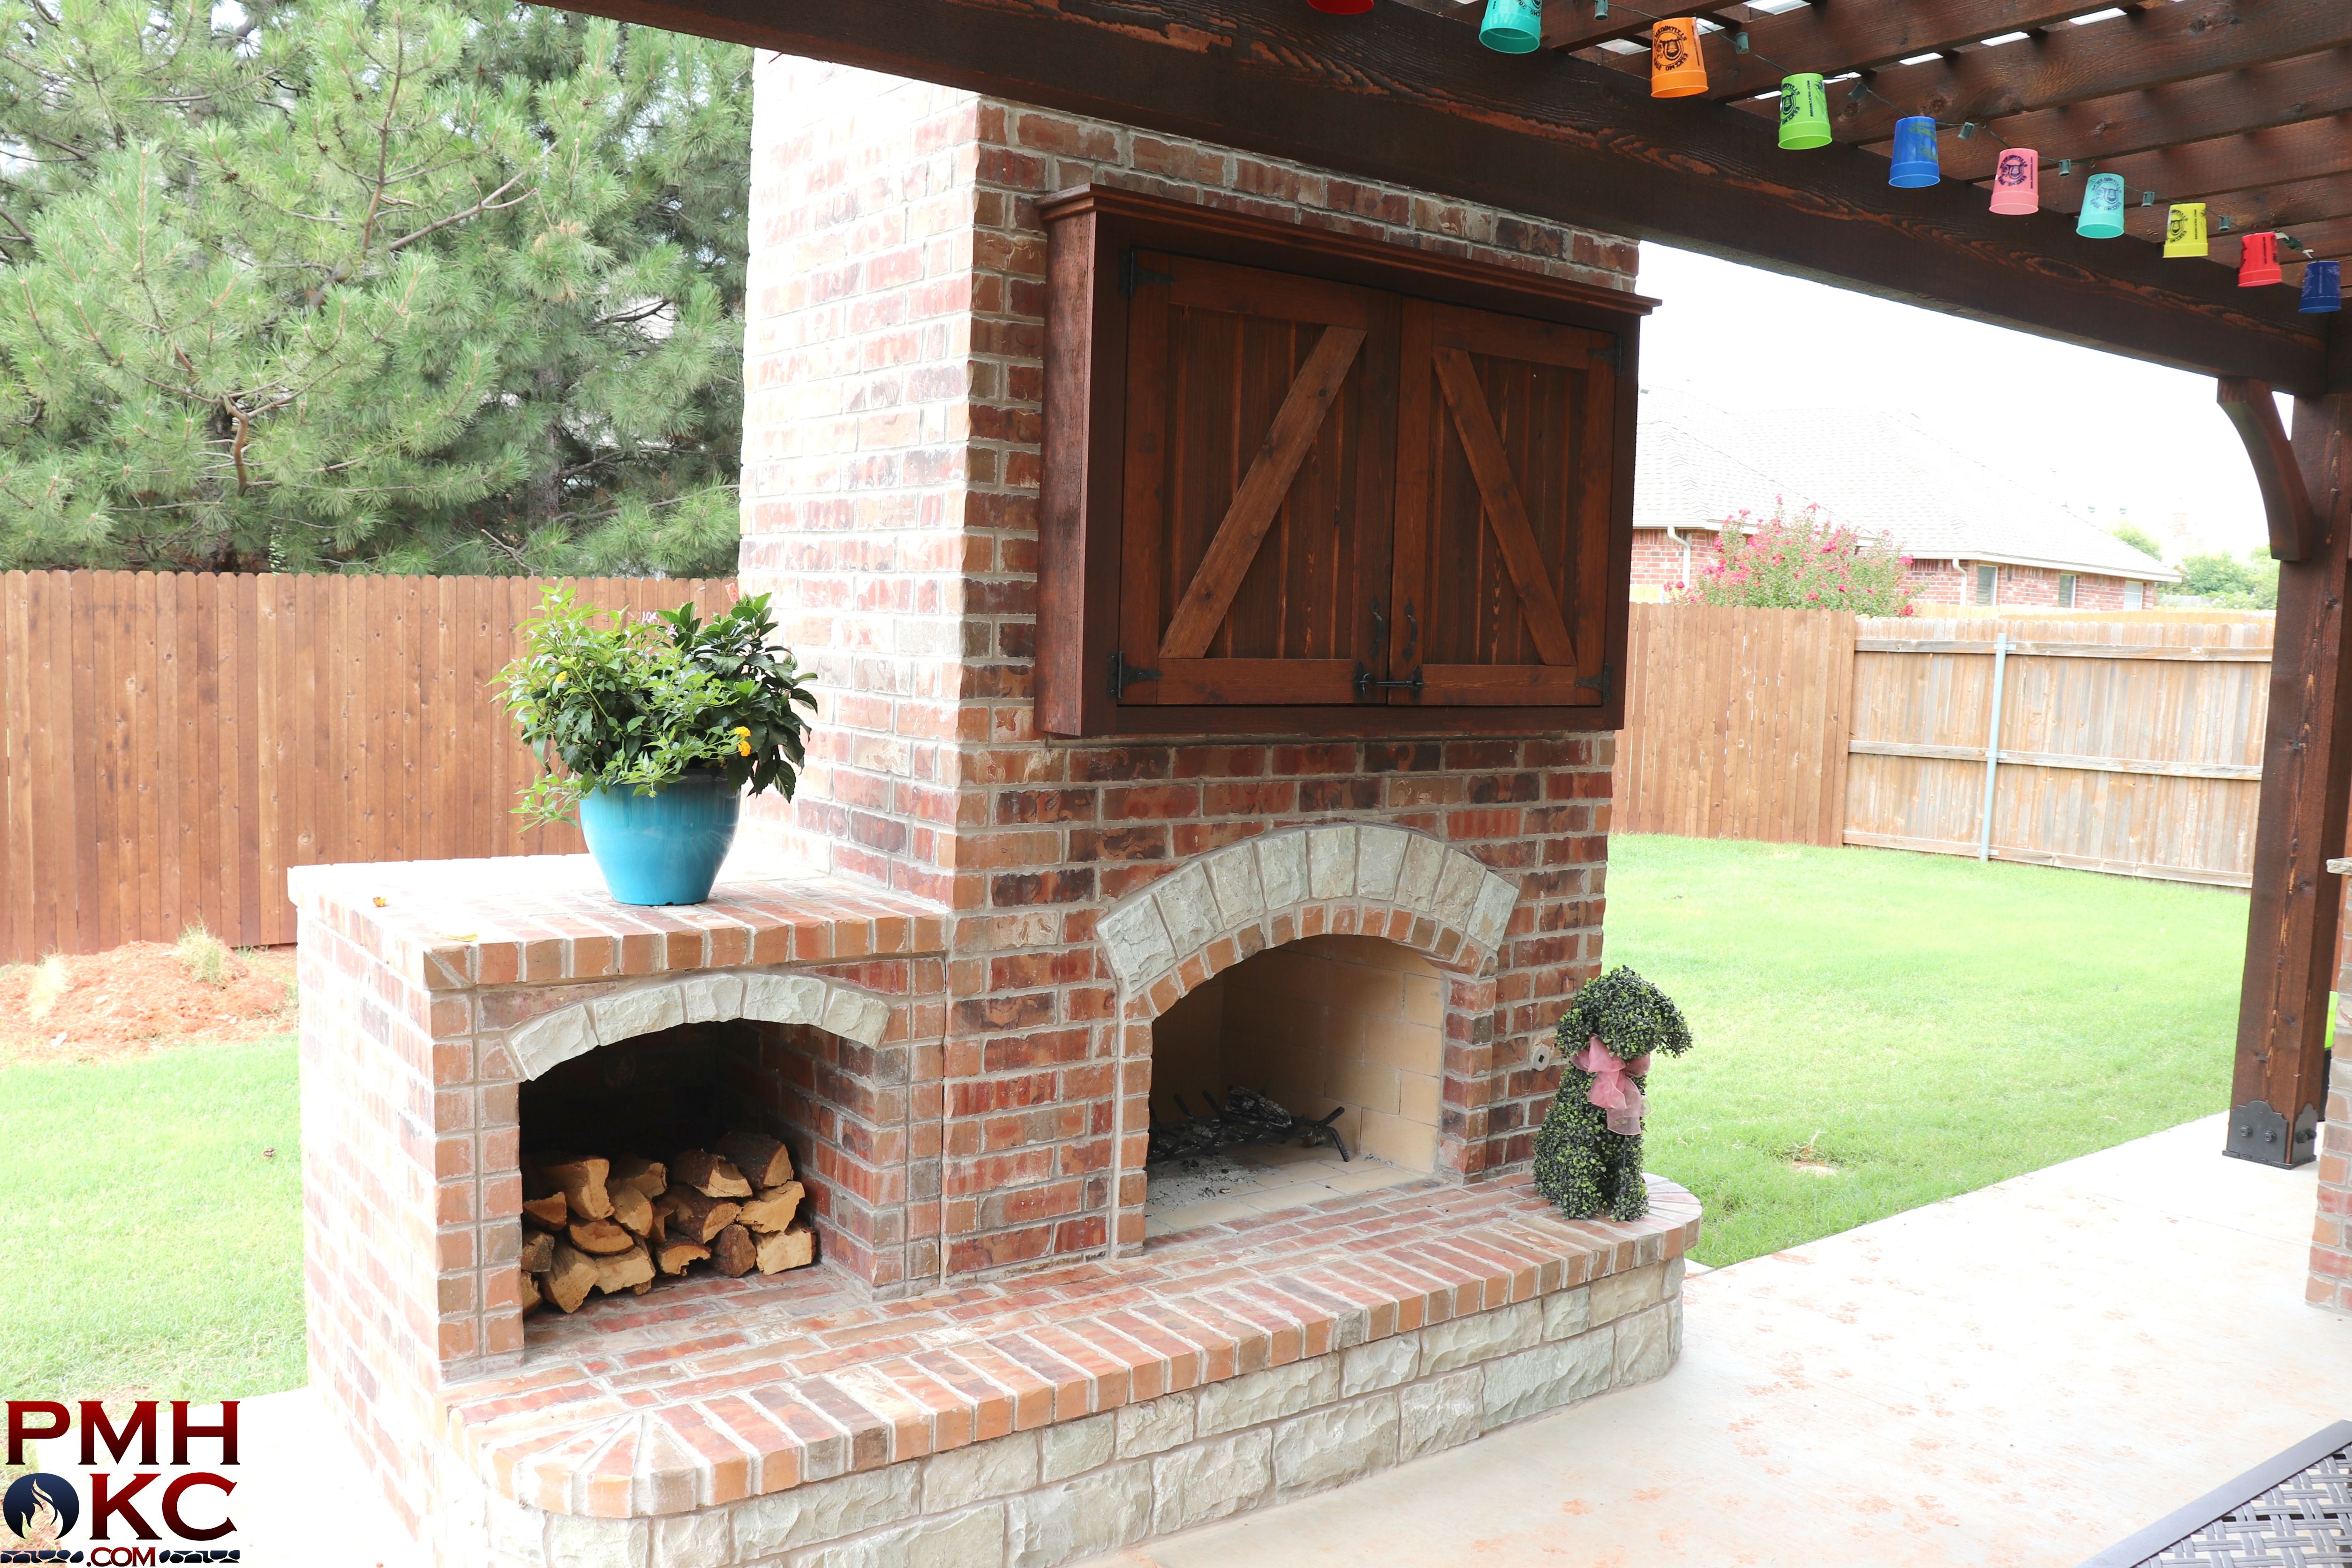 Pizza Oven Fireplace Beautiful Custom Made Brick Fireplace with A Firewood Holder and Tv